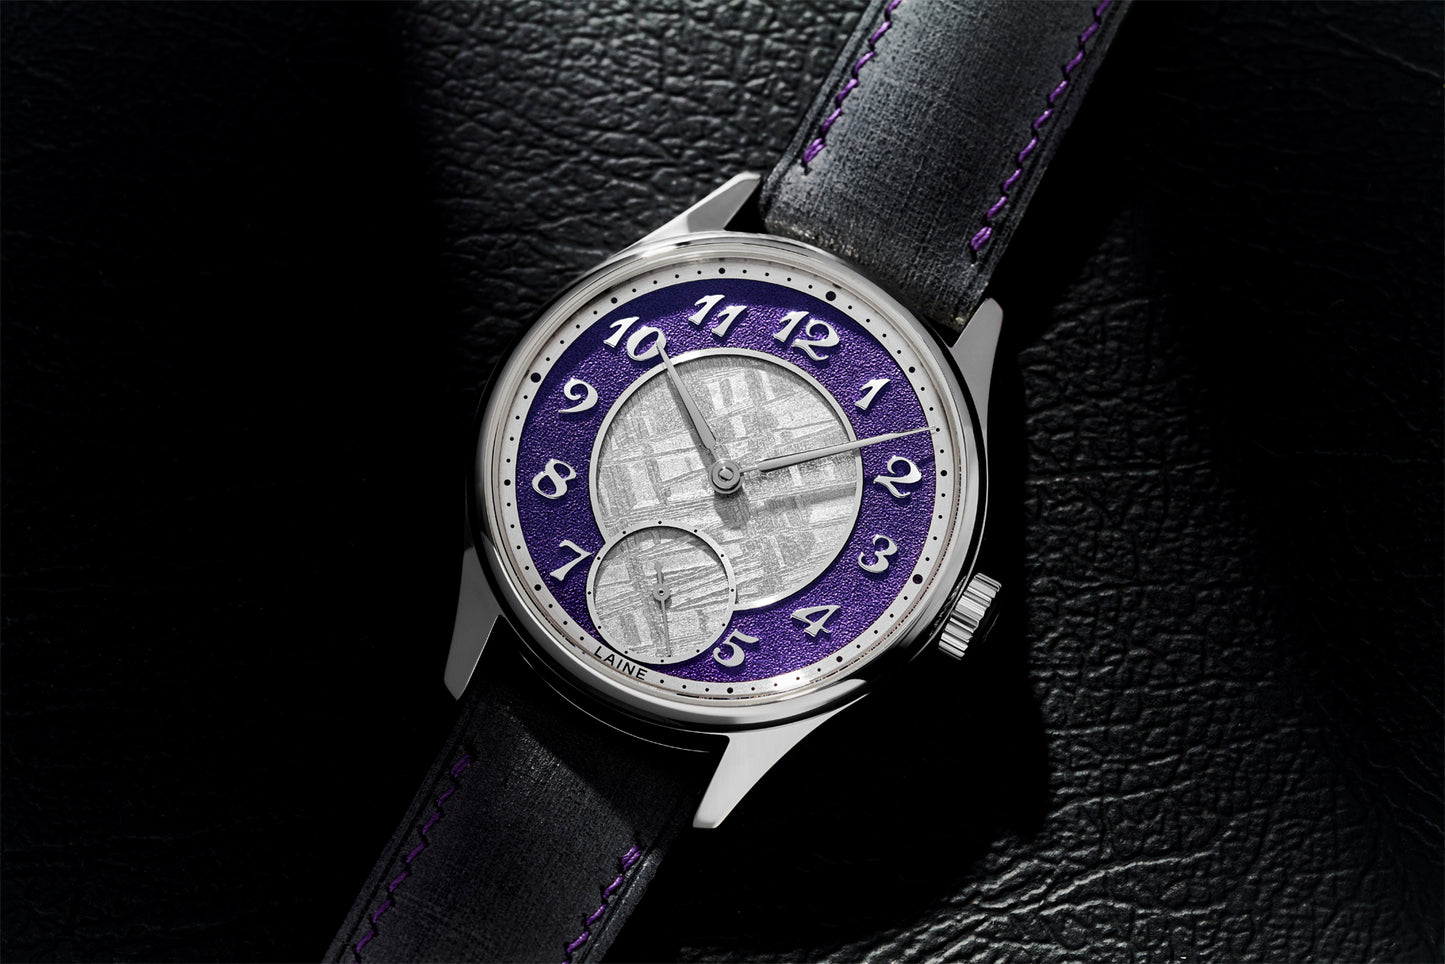 Laine x Revolution Purple Dial Frosted with Meteorite Center "One Love" (Breguet)